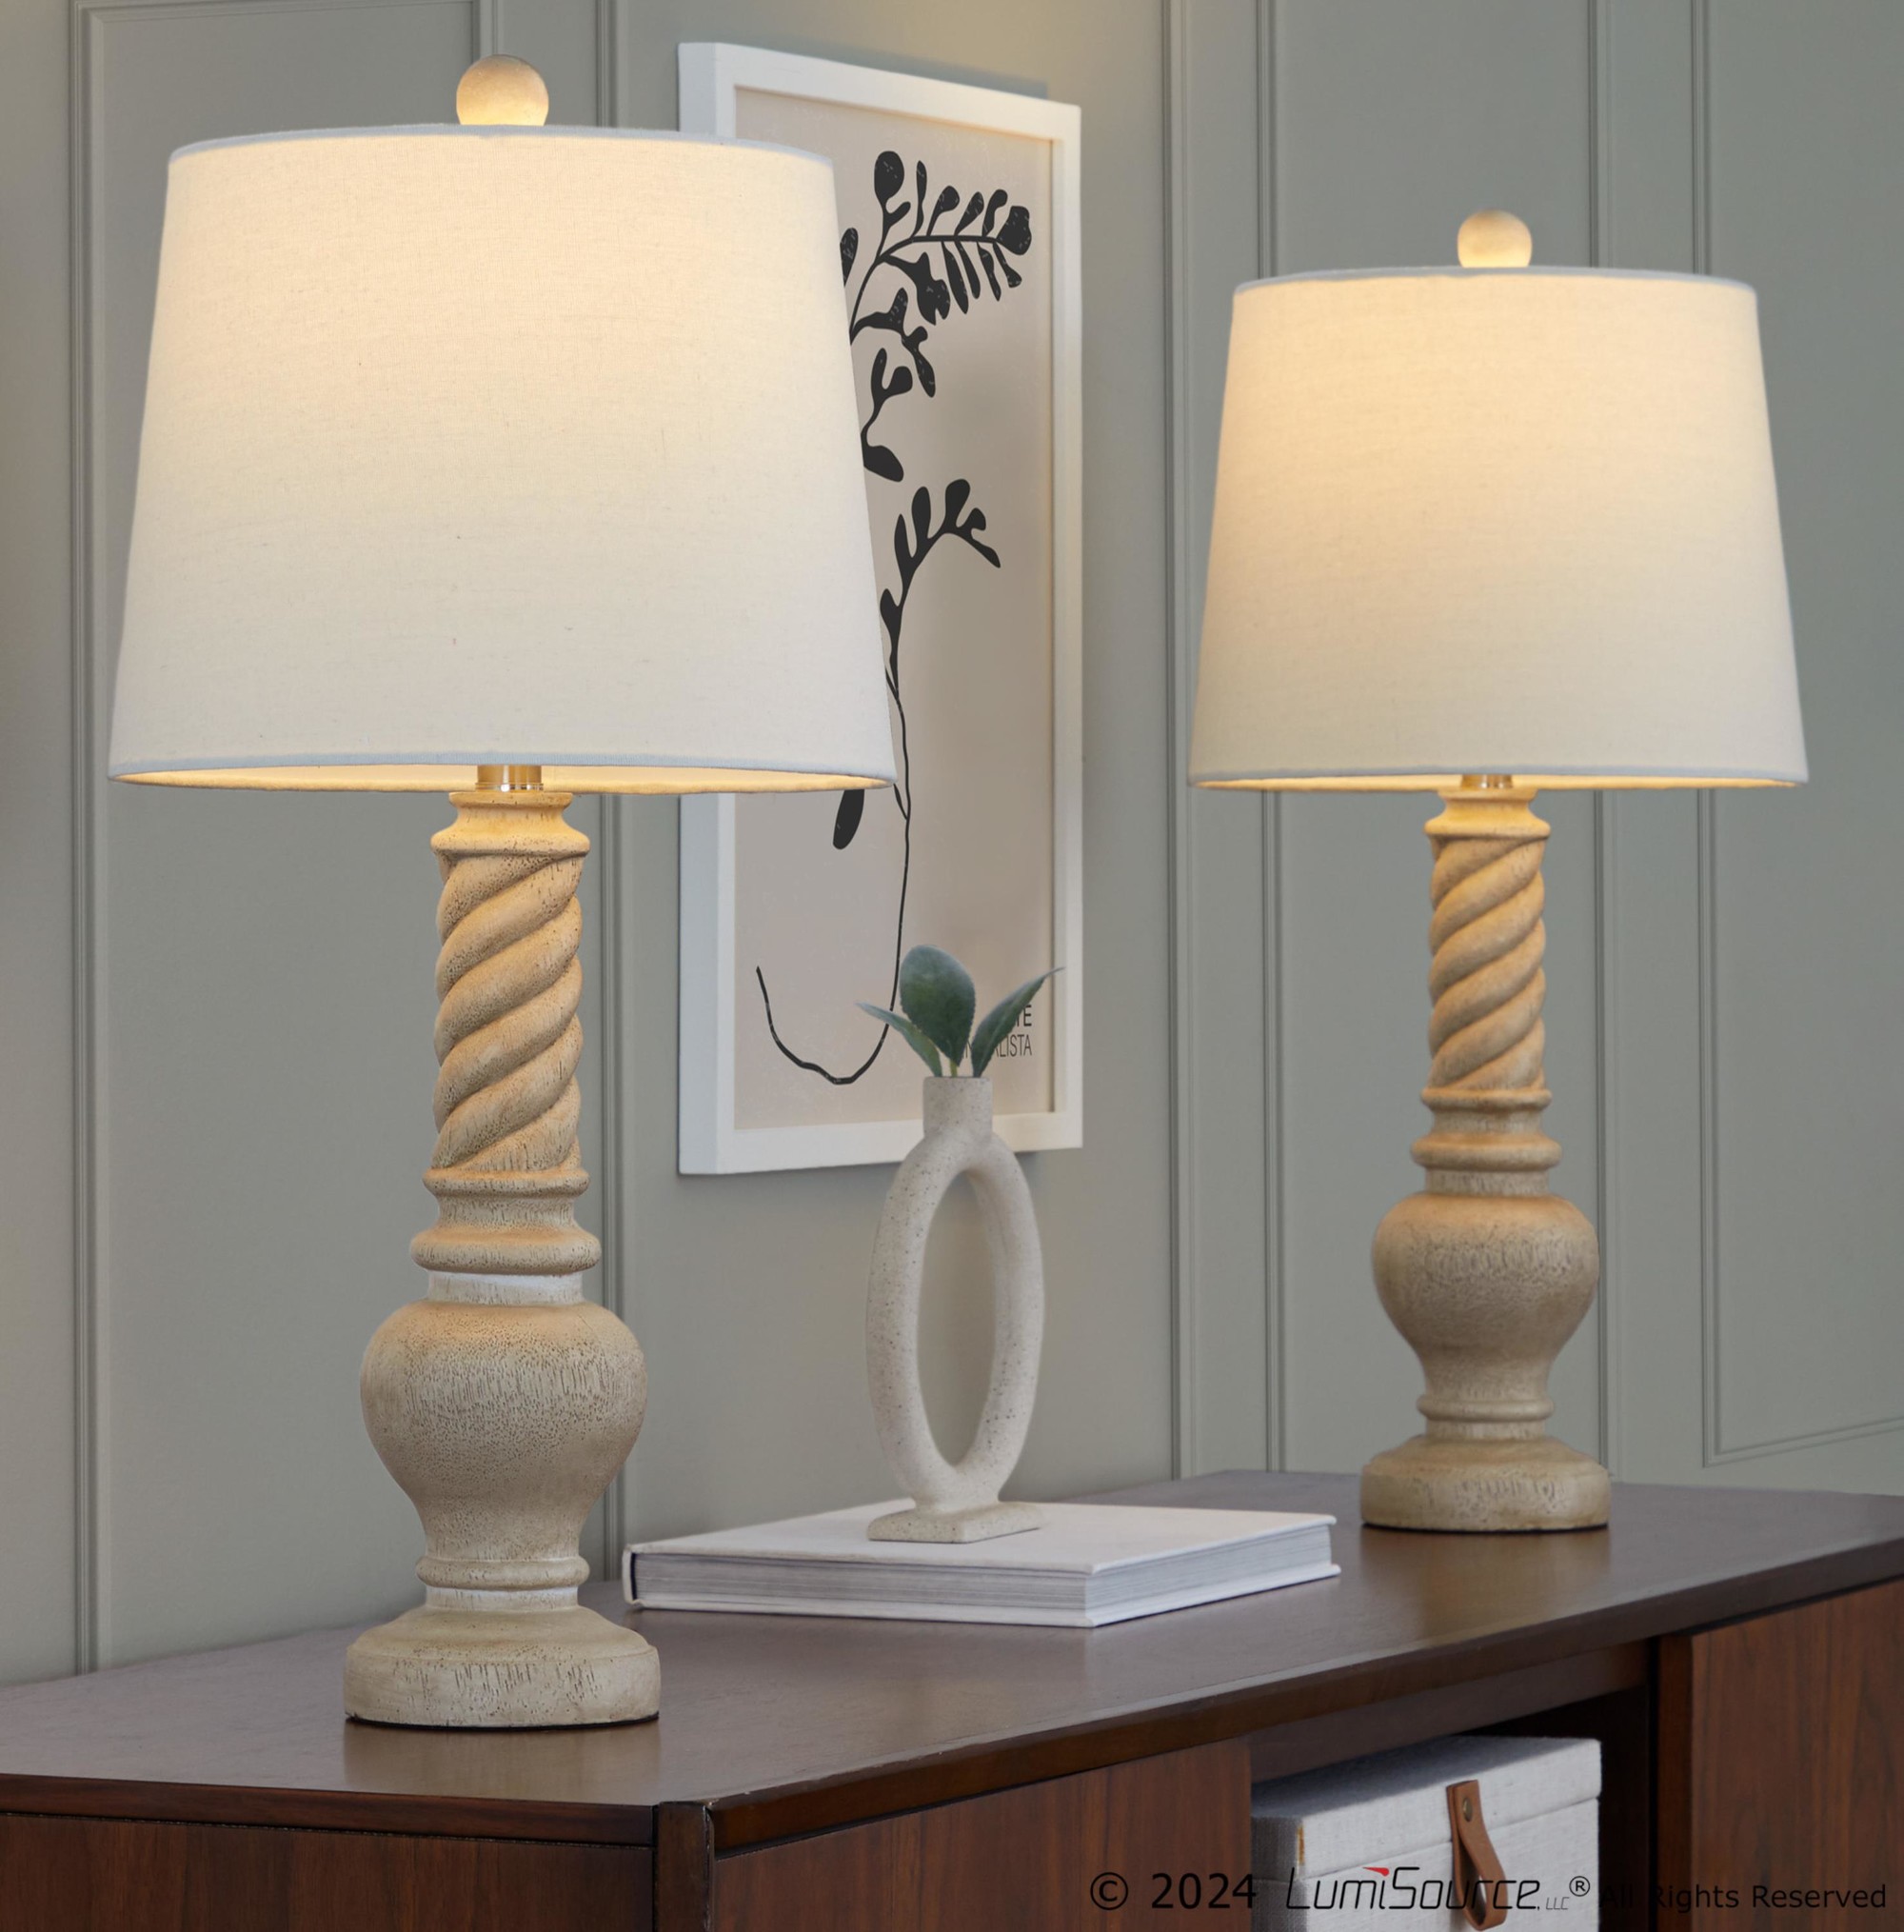 Post 25" Polyresin Table Lamp - Set Of 2